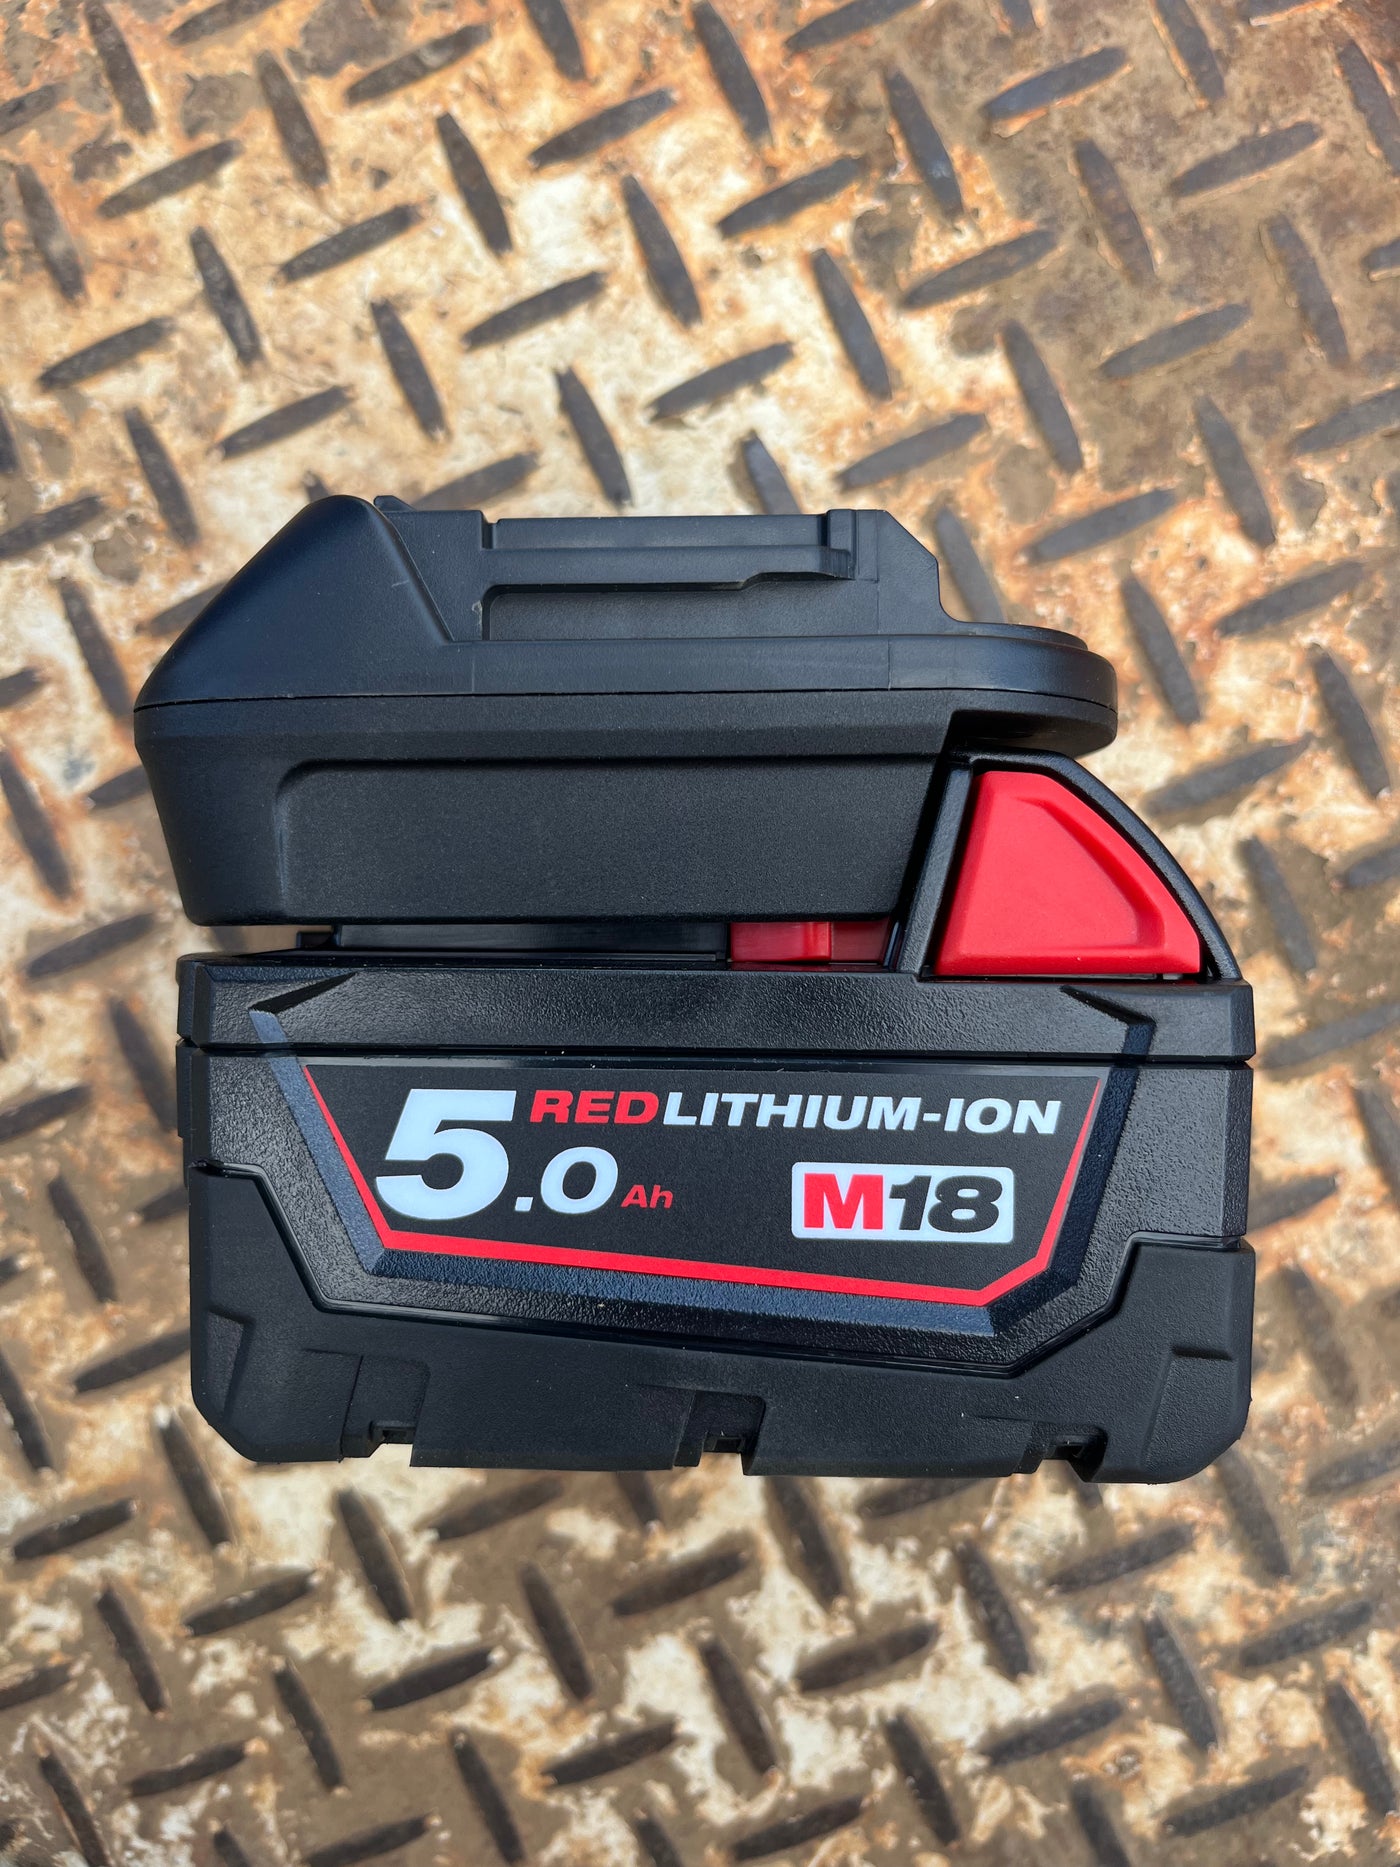 DM18M Battery Converter Adapter: Engineered for Makita tools, it transforms Milwaukee M18 18V to Makita 18V BL1830 BL1850 Batteries, while also accommodating Dewalt 20V Battery compatibility